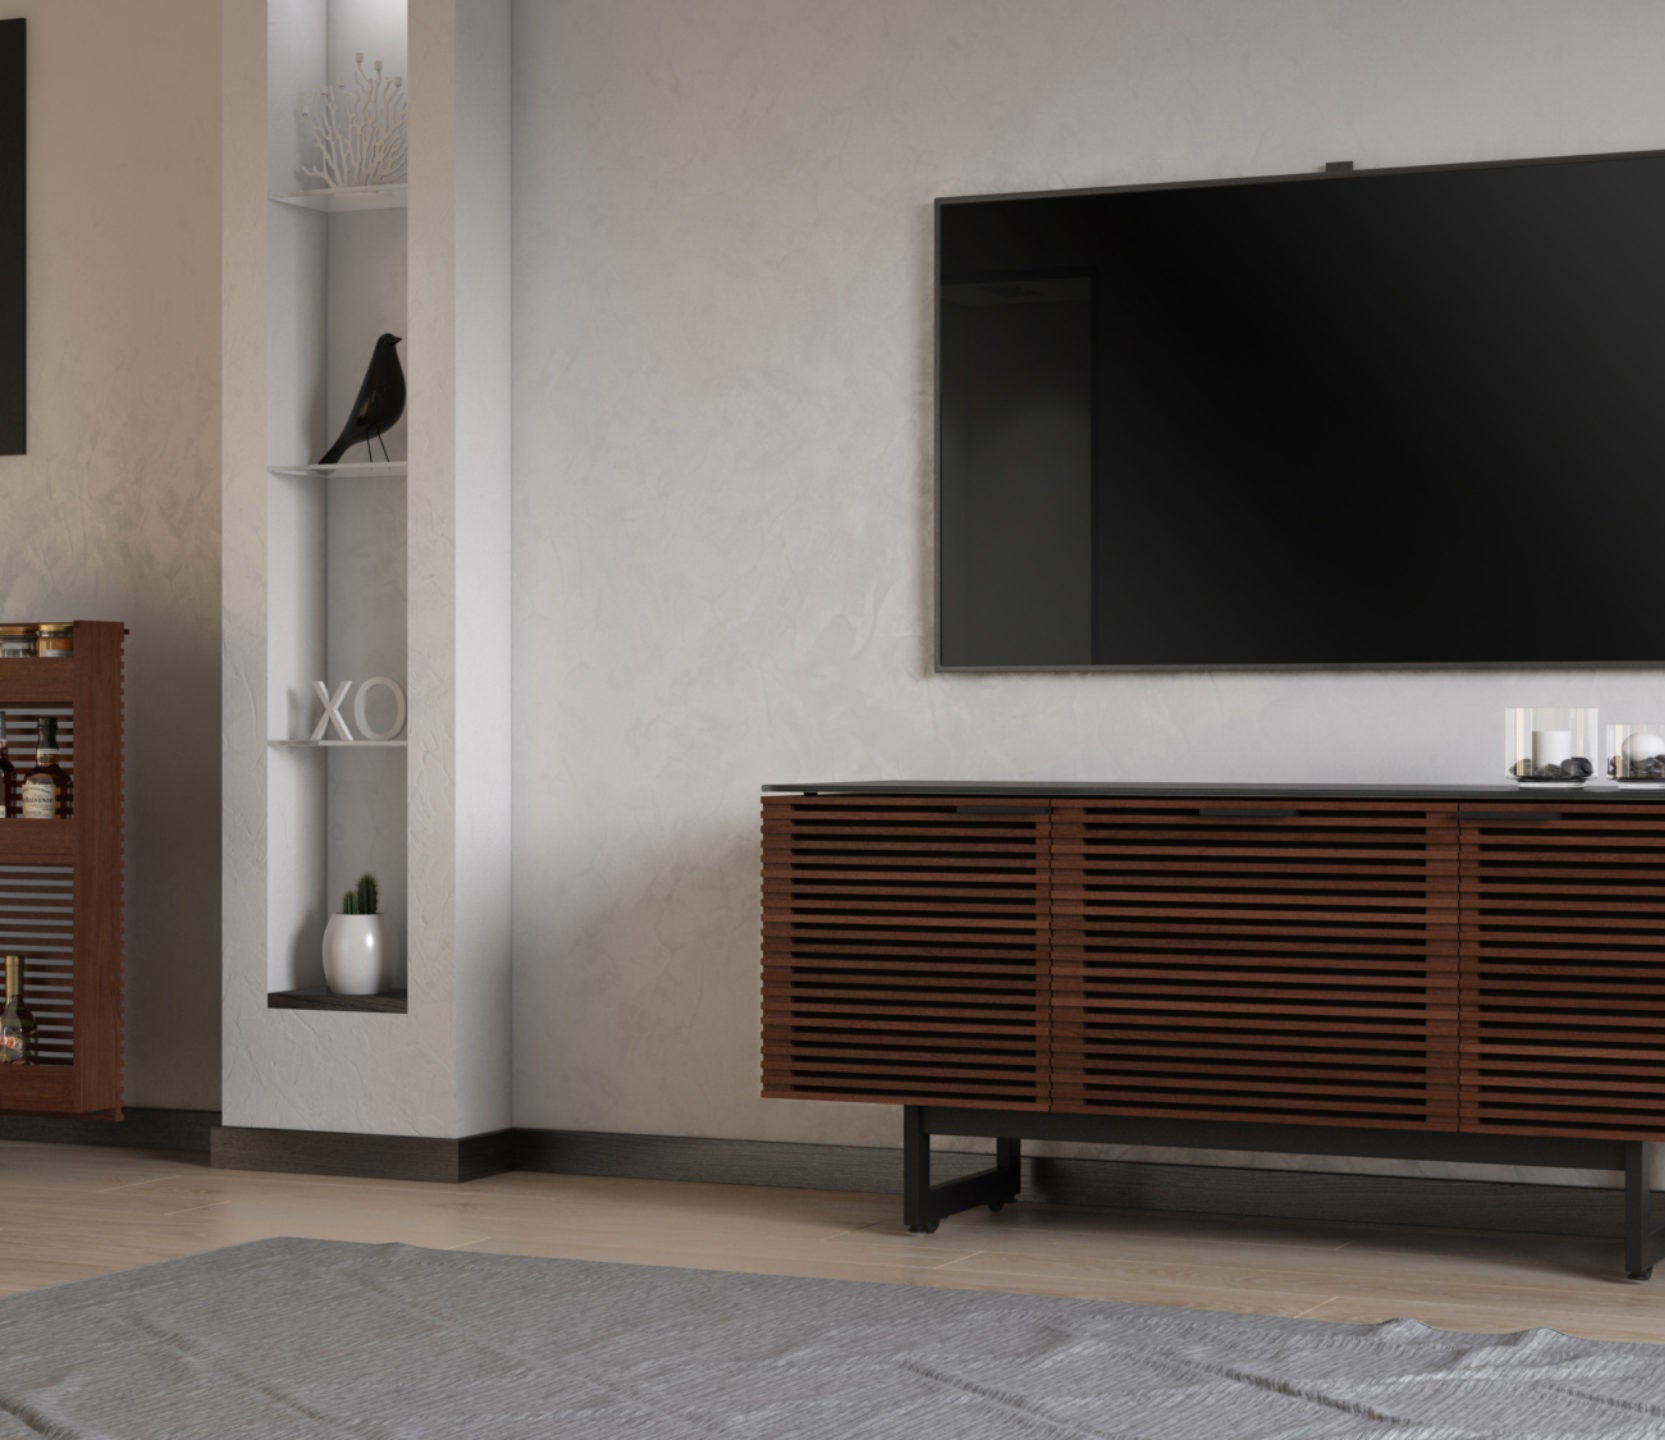 The triple-wide cabinet with wood slotted front and black metal legs under a TV in a living room.